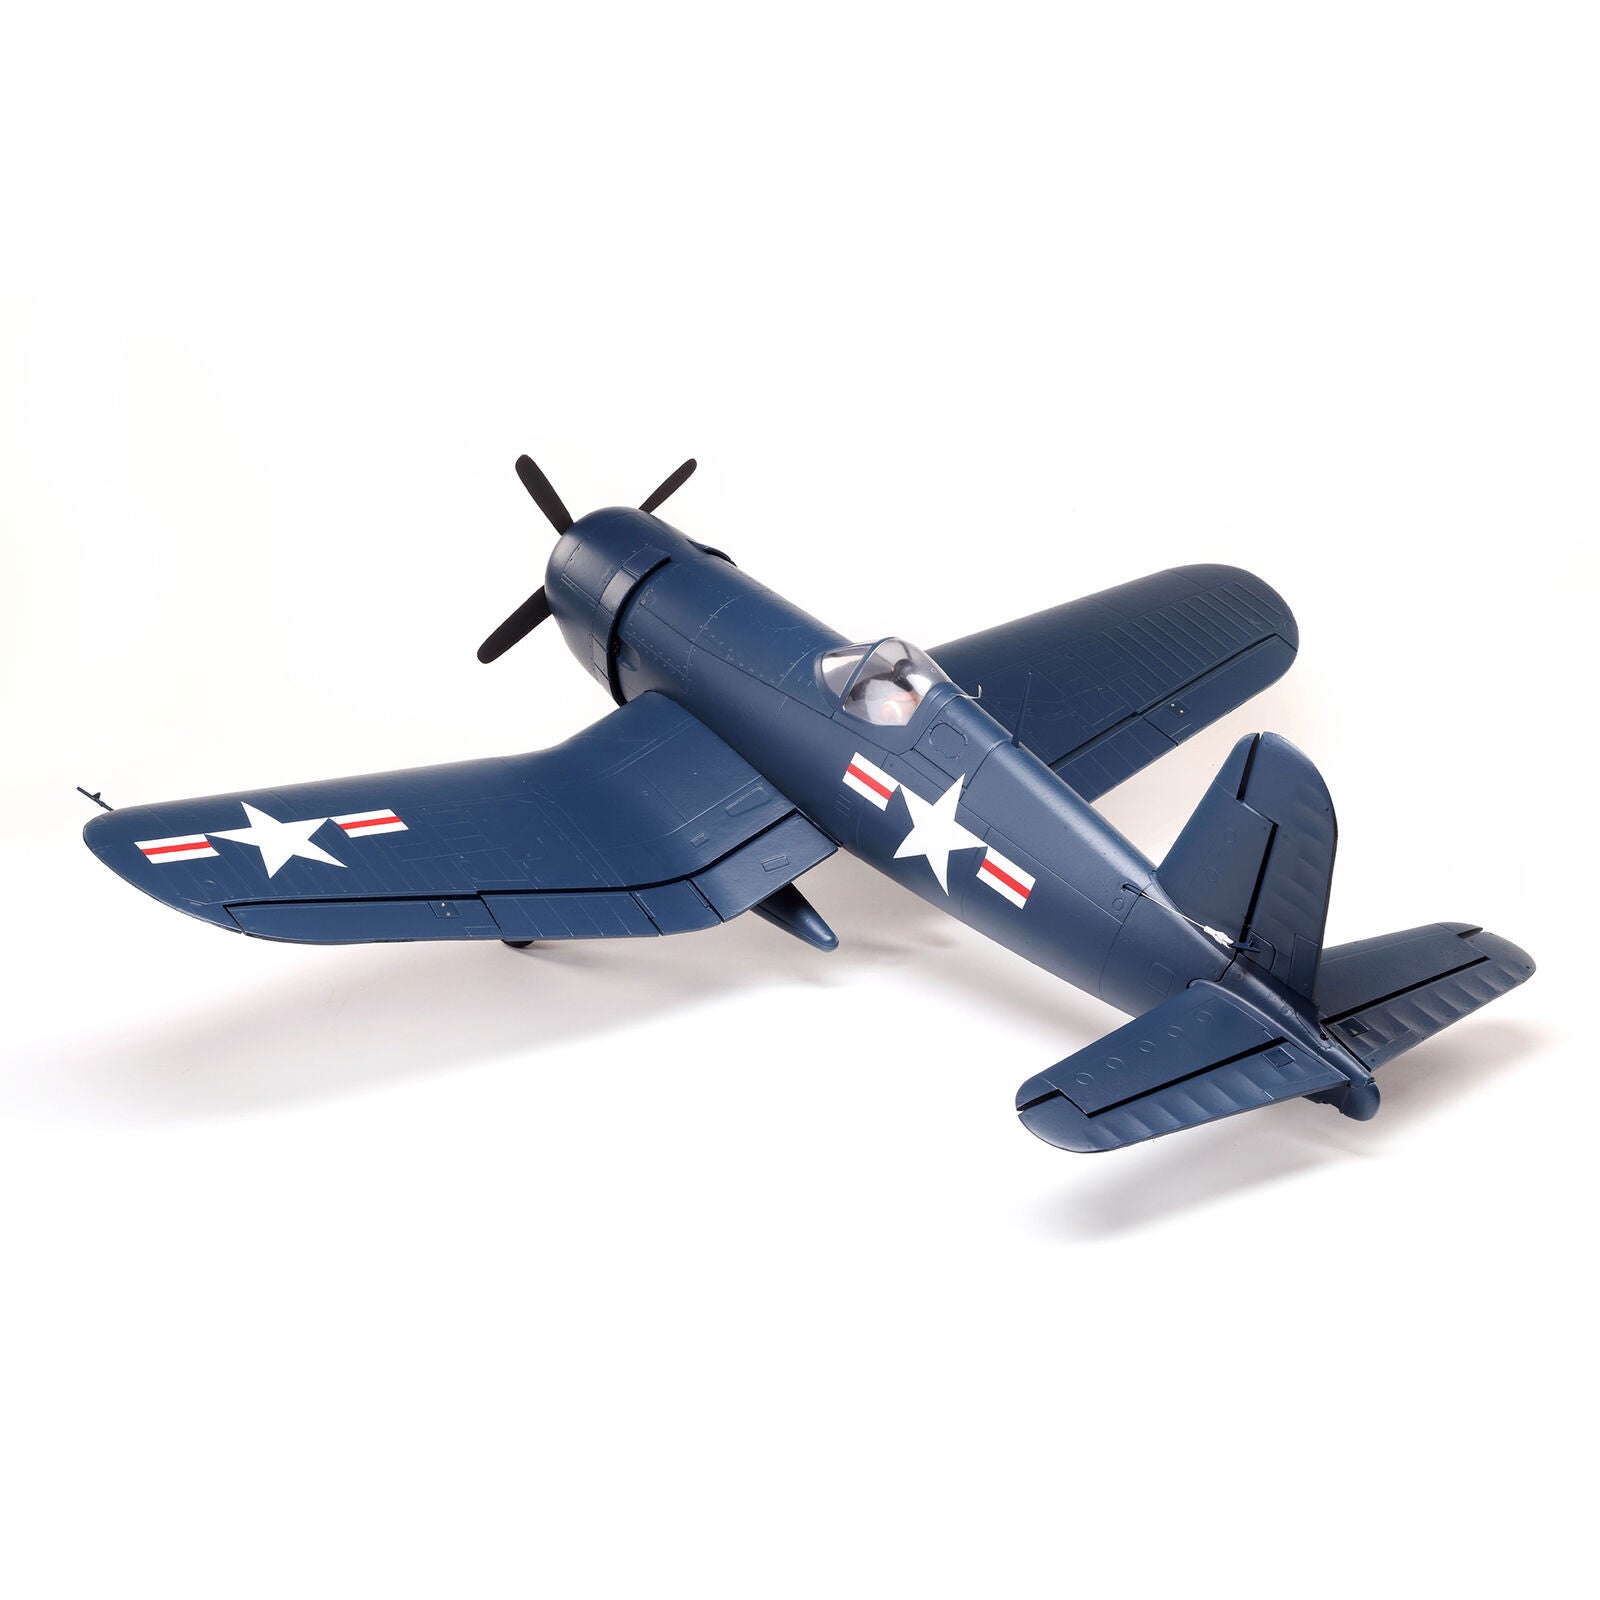 E-flite F4U-4 Corsair 1.2m BNF Basic with AS3X and SAFE Select - EFL18550